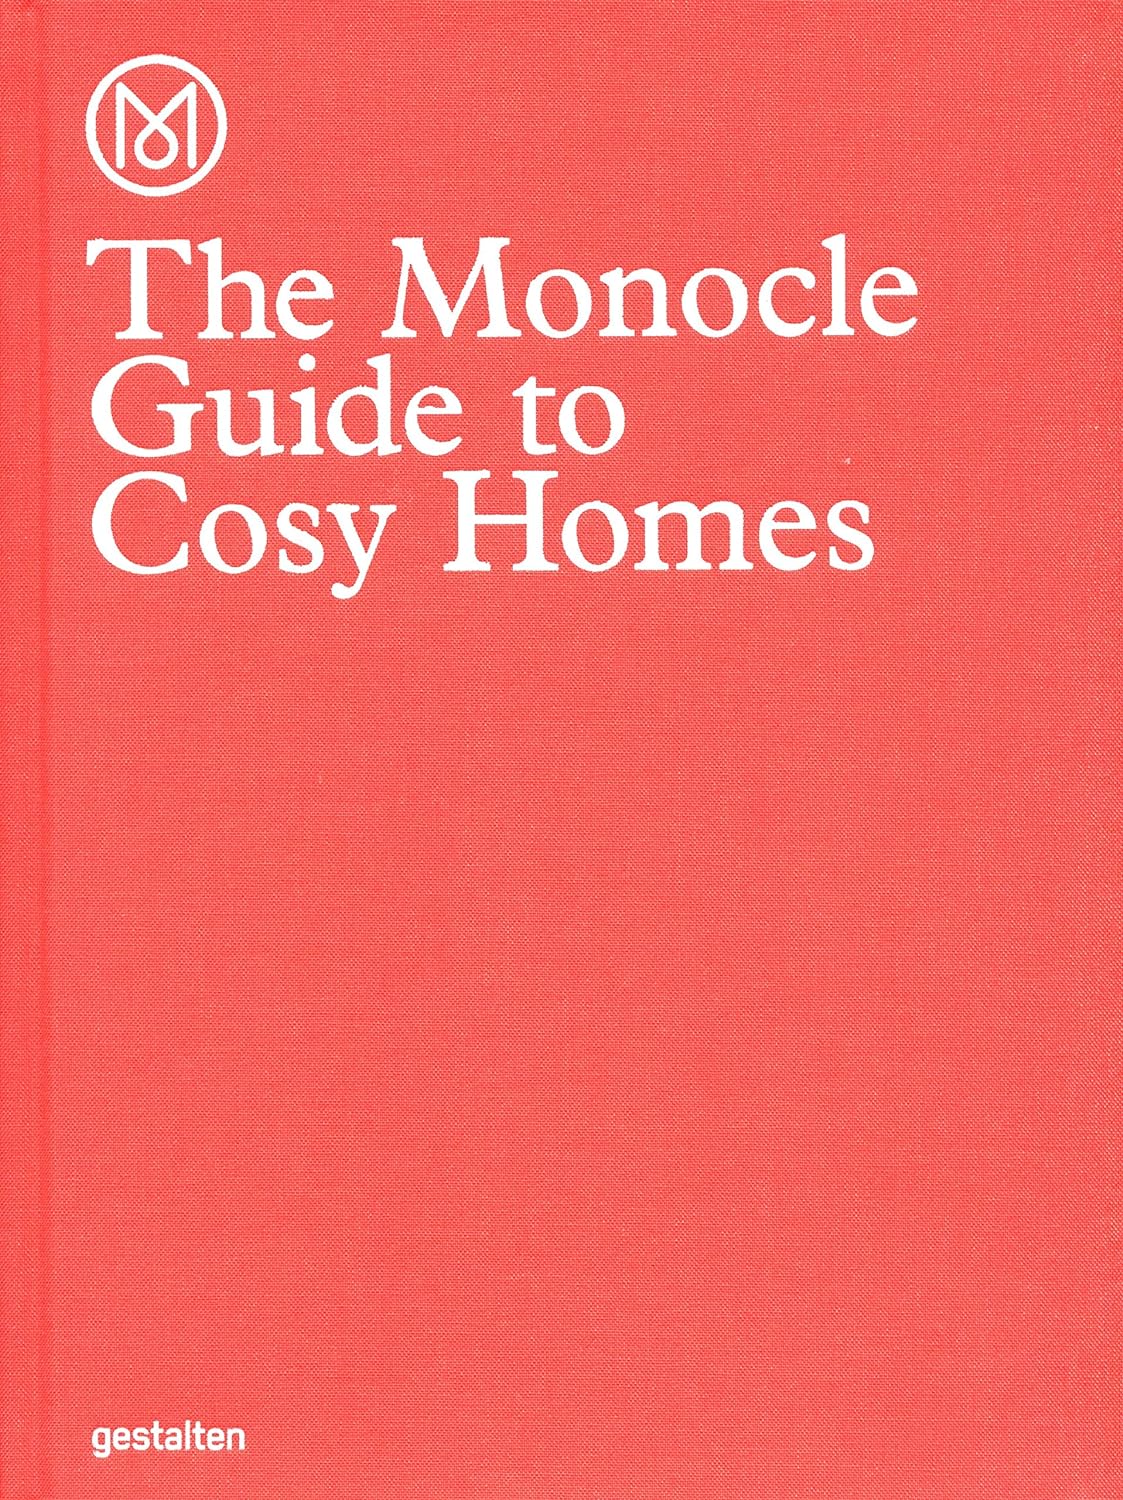 The Monocle Guide to Cosy Homes [Book]